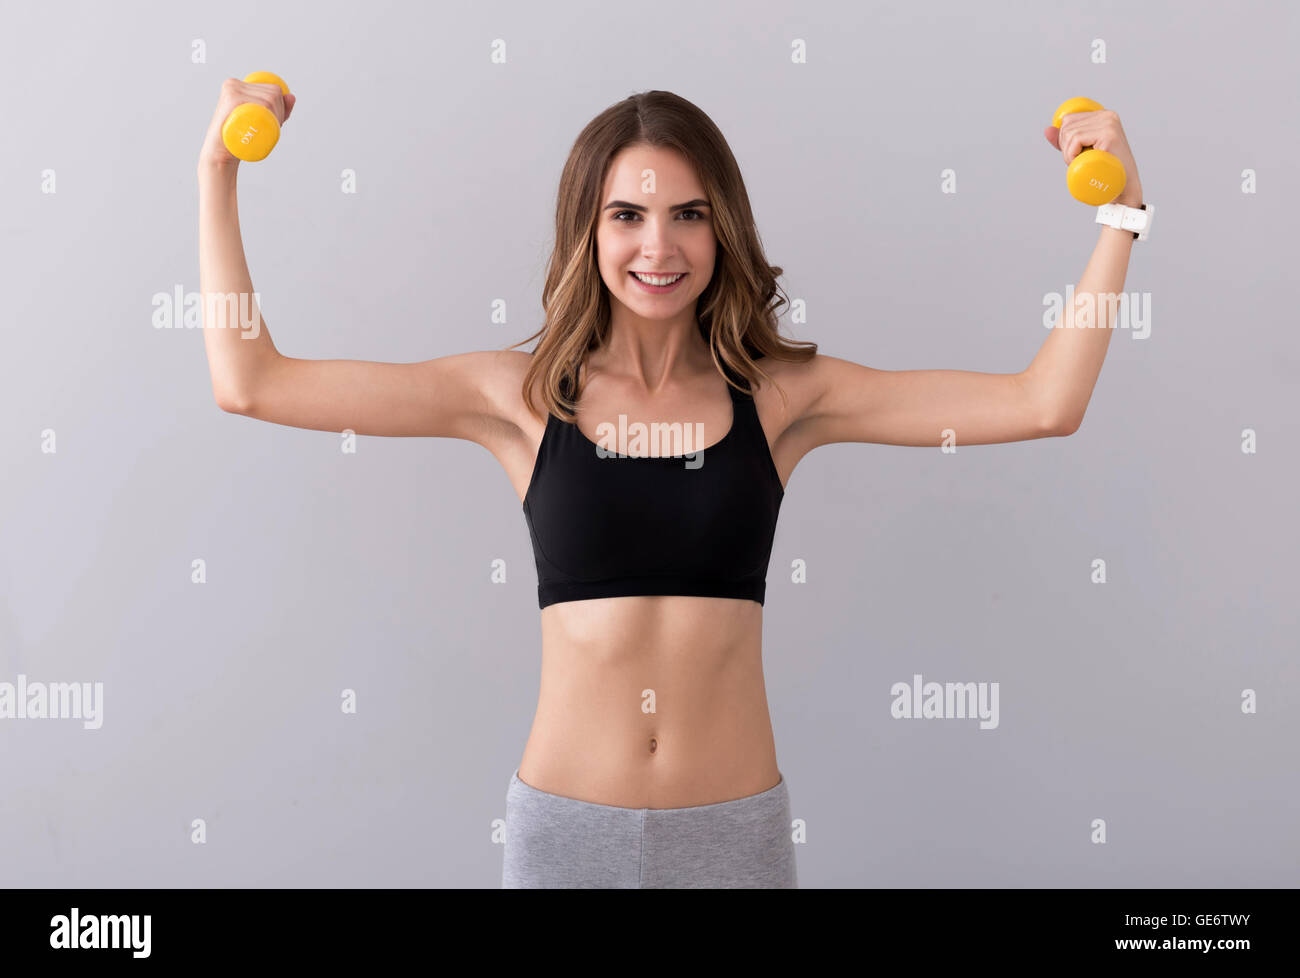 Nice smiling woman practicing with dumb bells Stock Photo